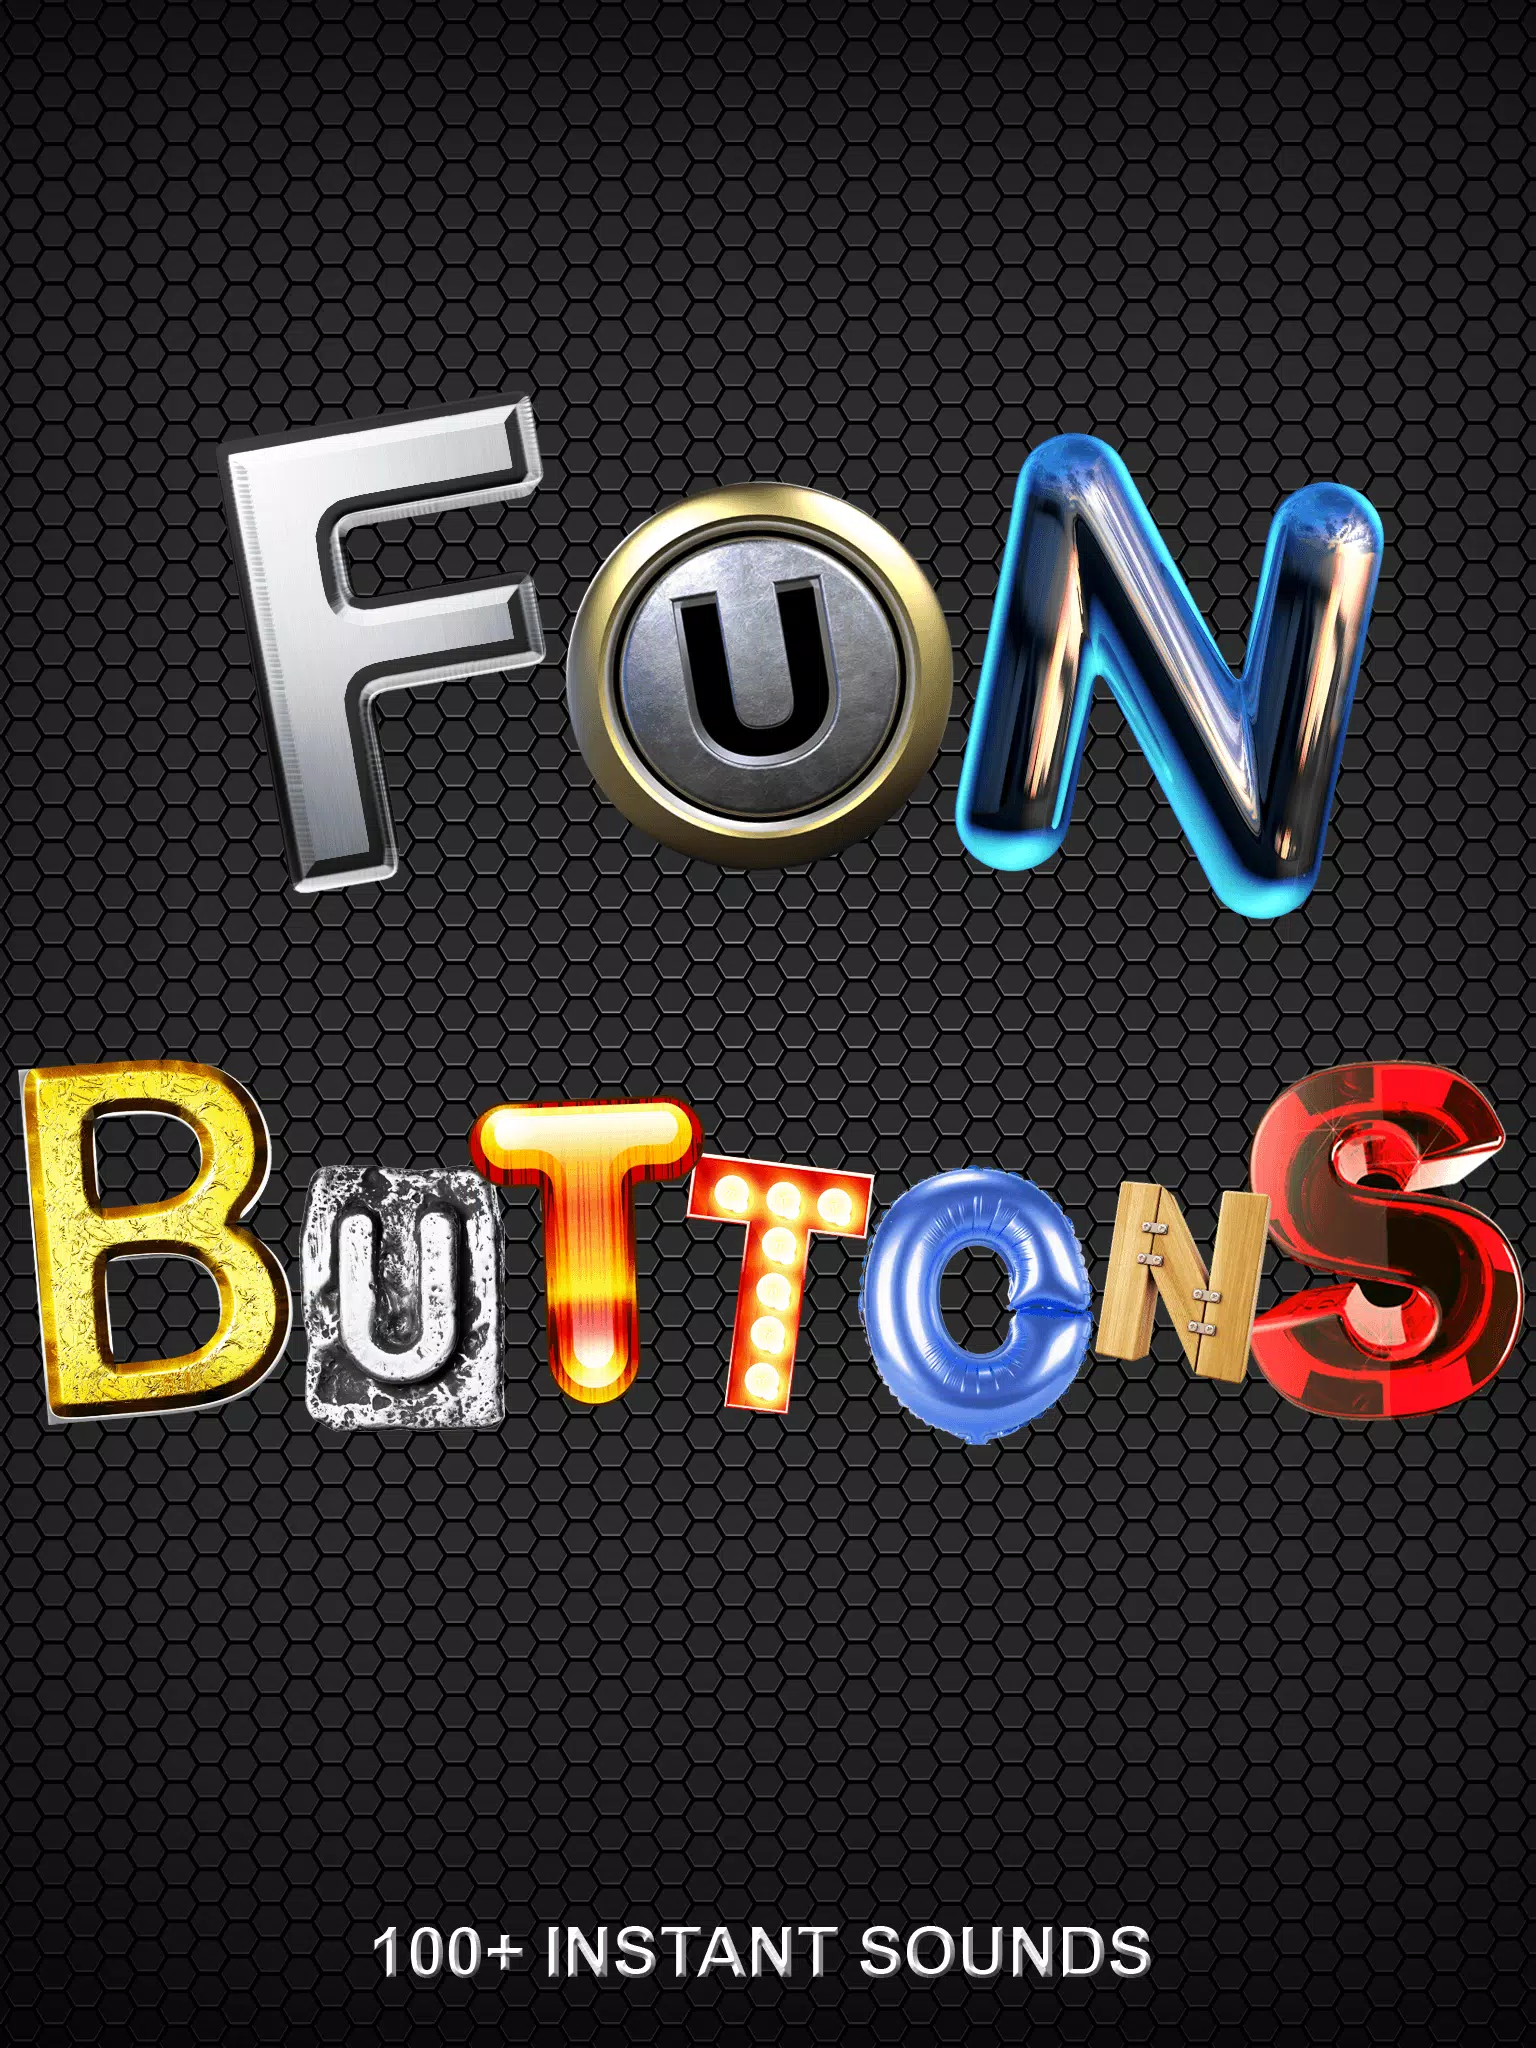 Instant Buttons: Collection of funny sounds you can use in your